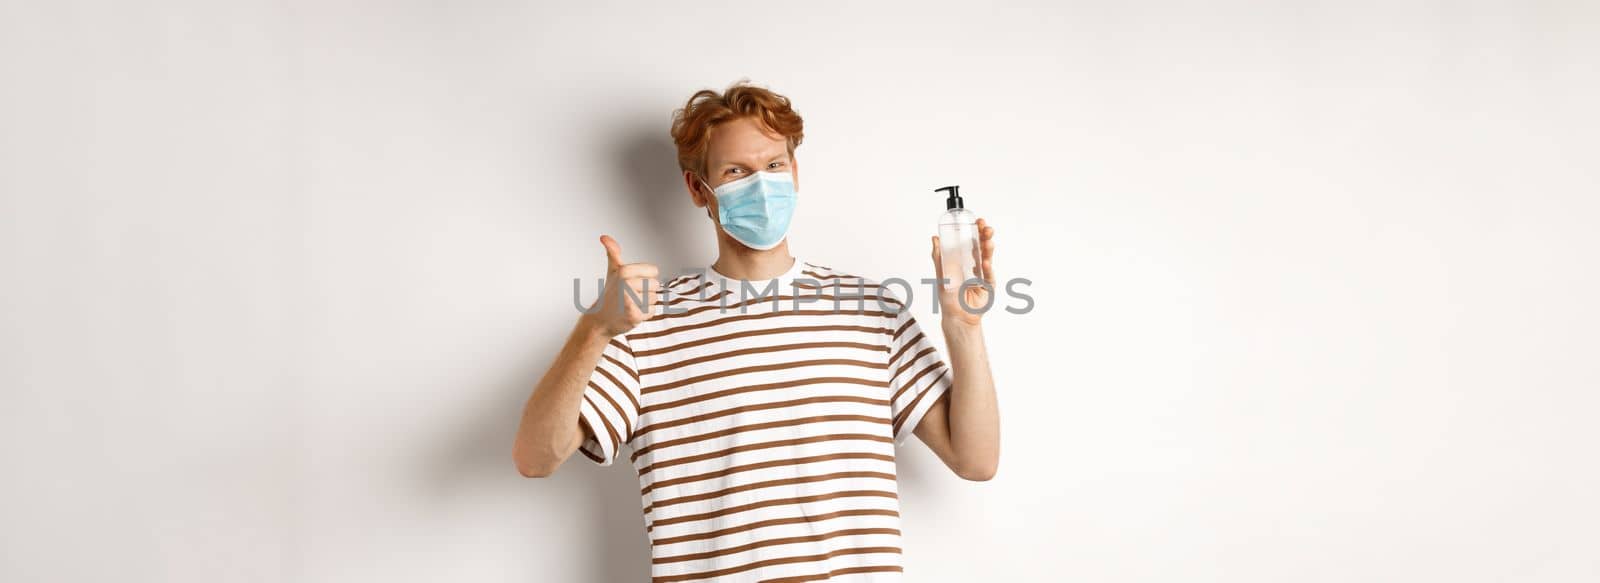 Covid-19, health and lifestyle concept. Smiling male model with red hair, wearing face mask, showing hand sanitizer and thumb-up, recommend to use antiseptic, white background.